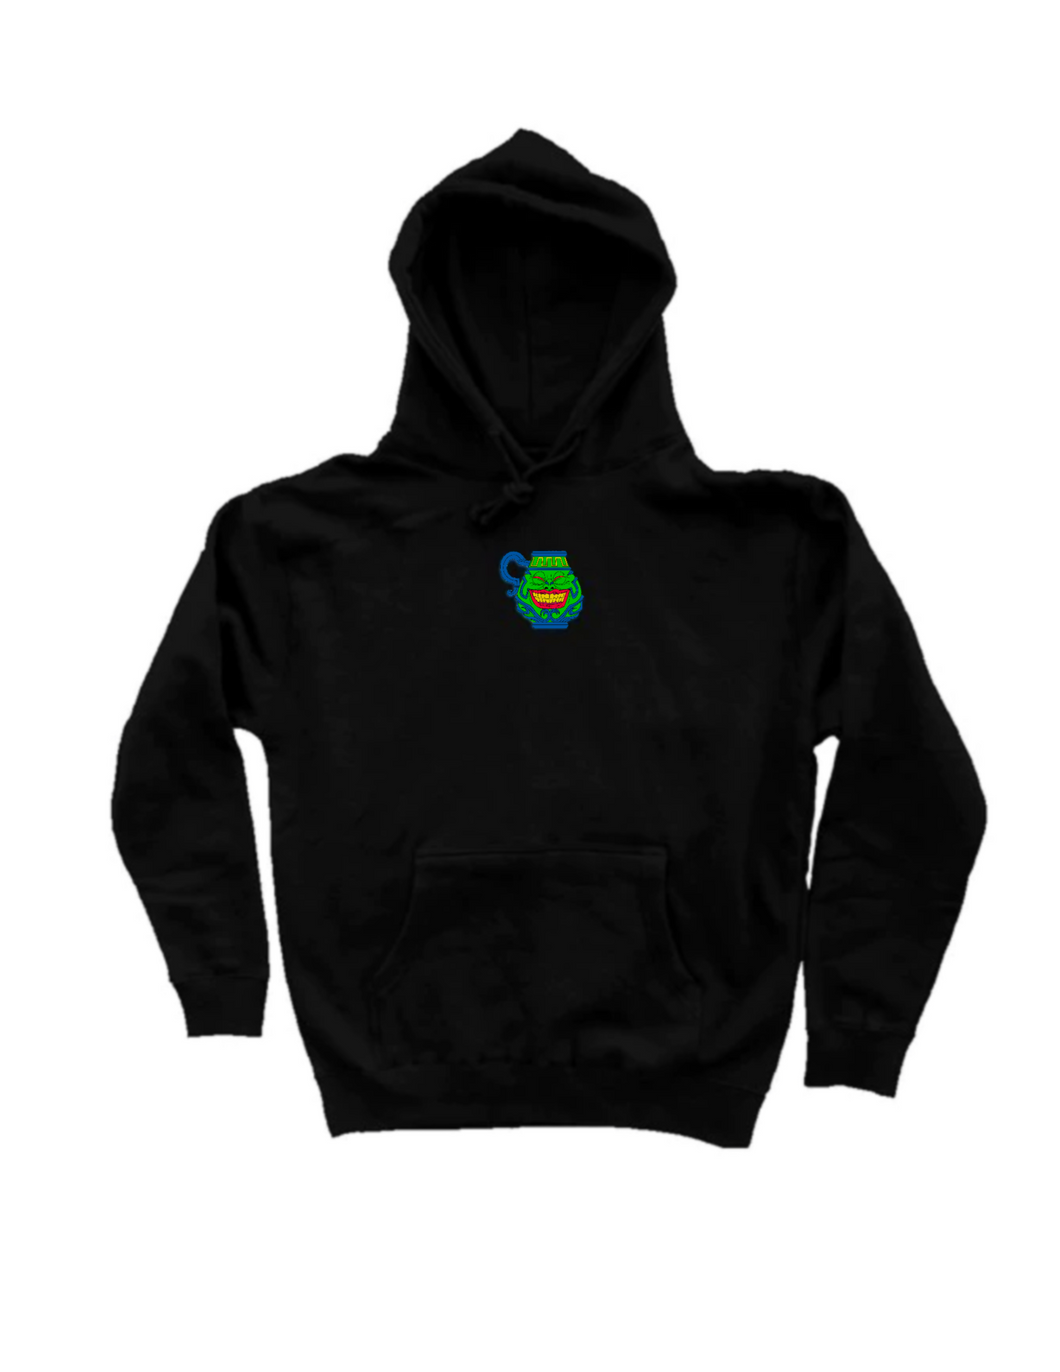 POT OF GREED! (Embroidered Pullover Hoodie) Black